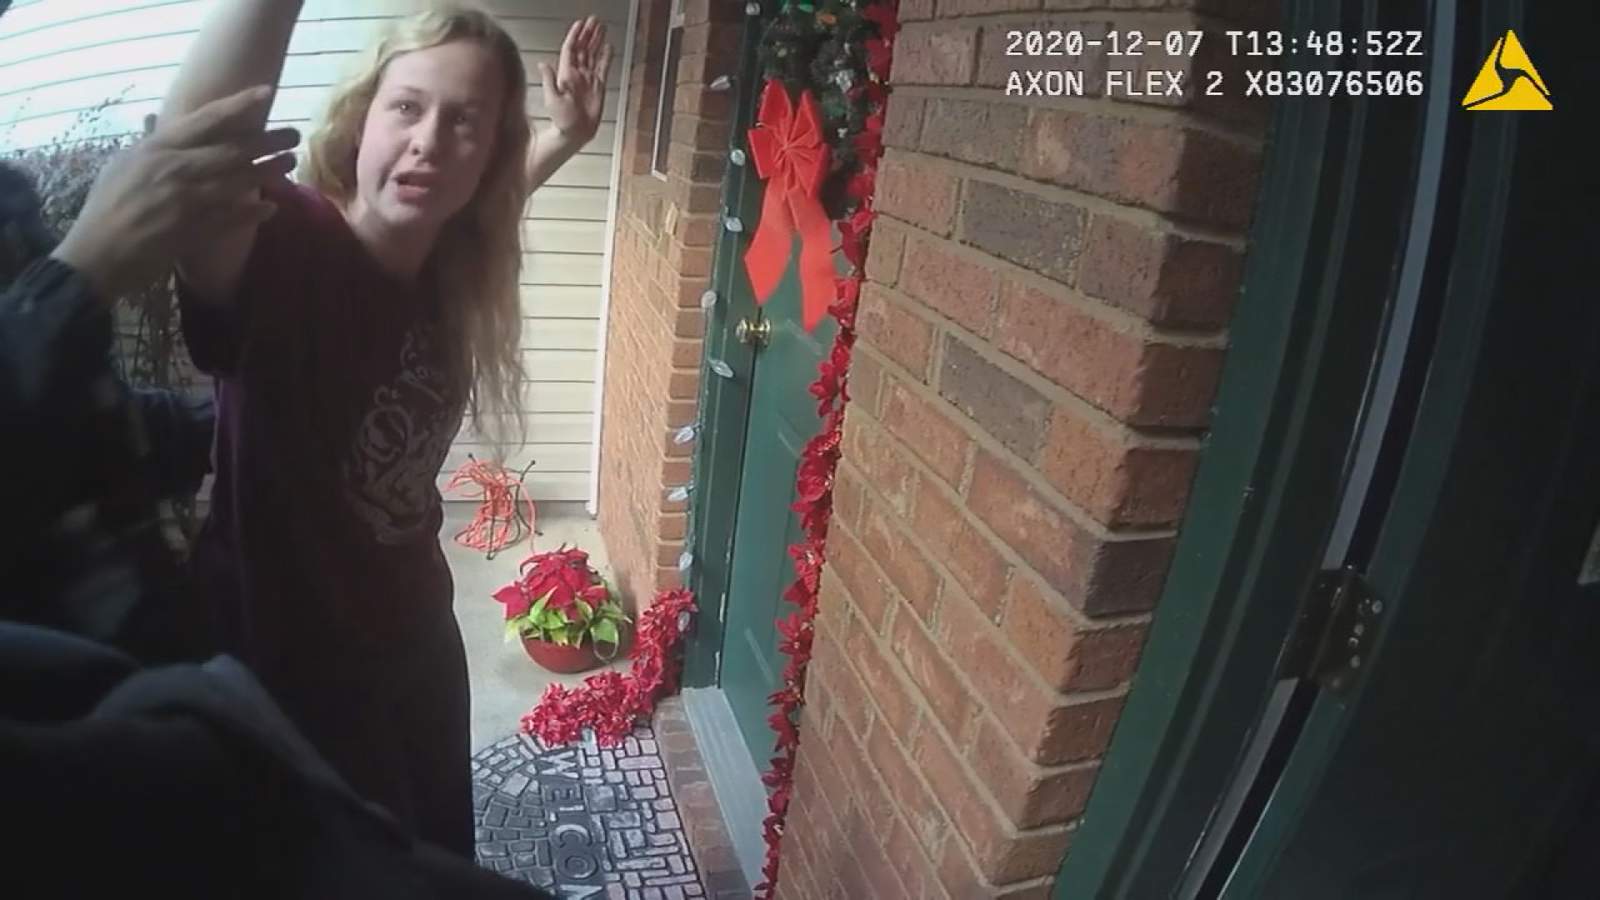 Bodycam shows raid at home of ousted Florida COVID-19 data curator